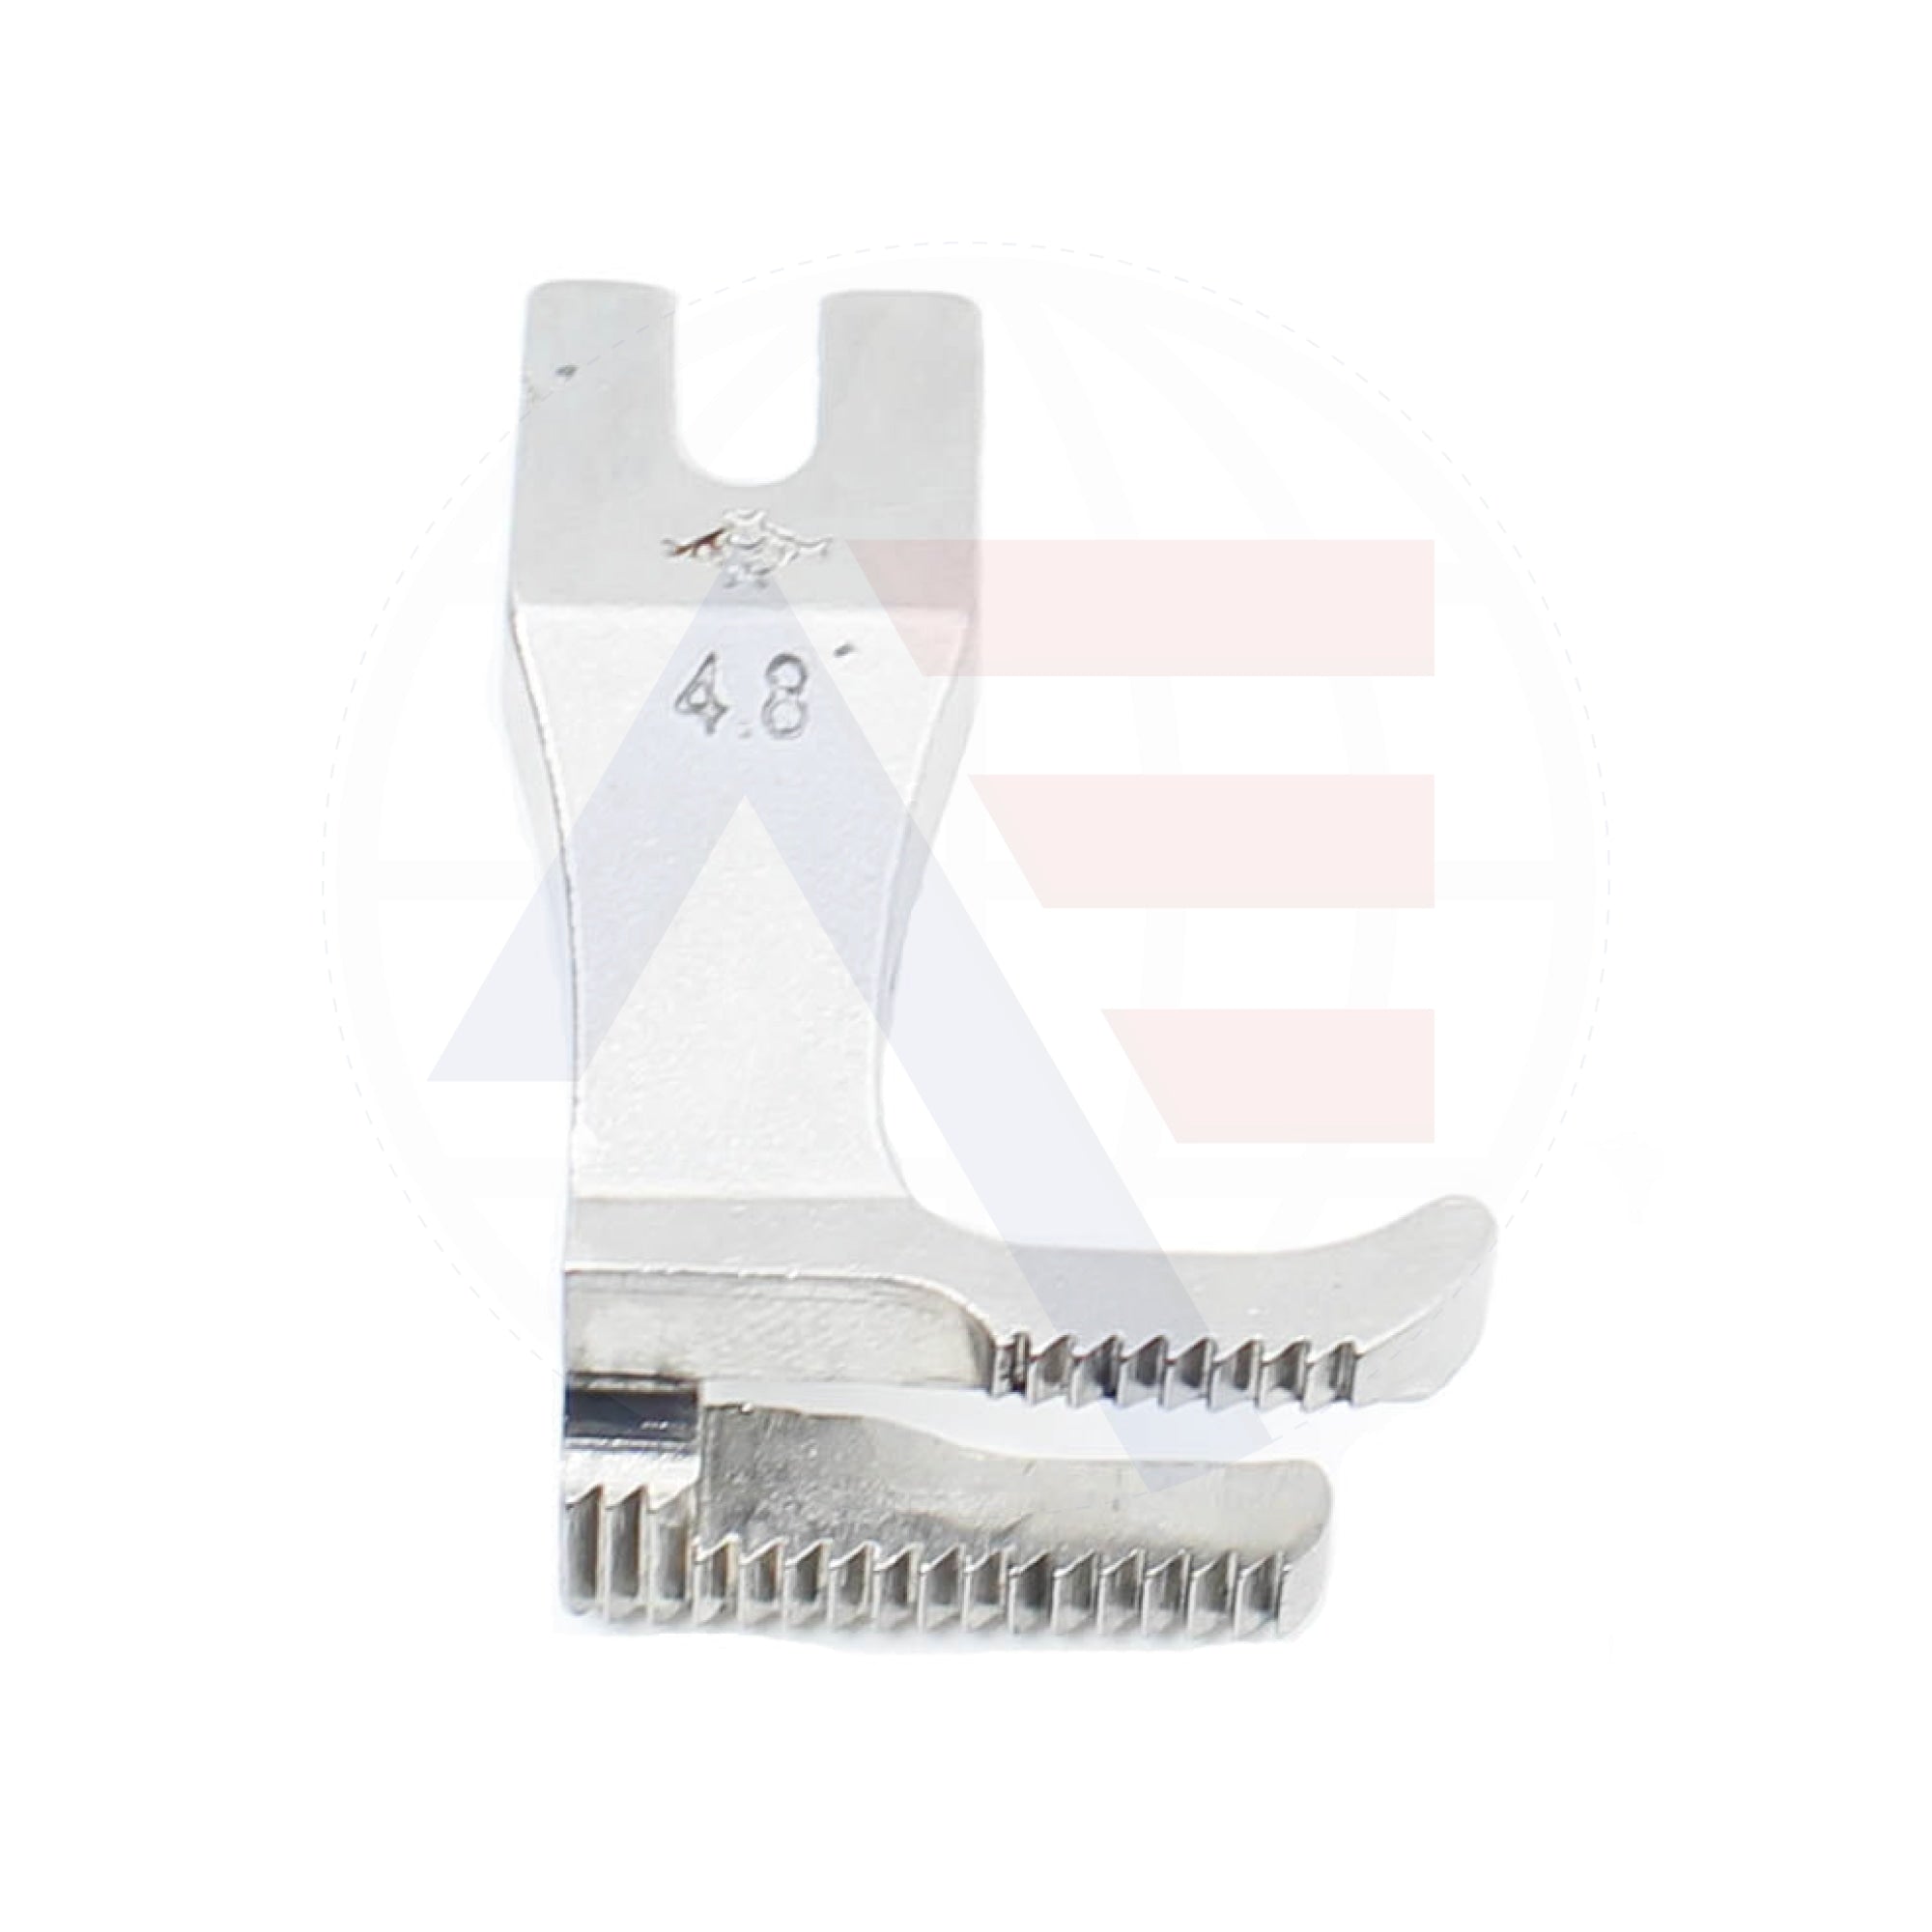 151847001X3/16 Outside Foot Sewing Machine Spare Parts